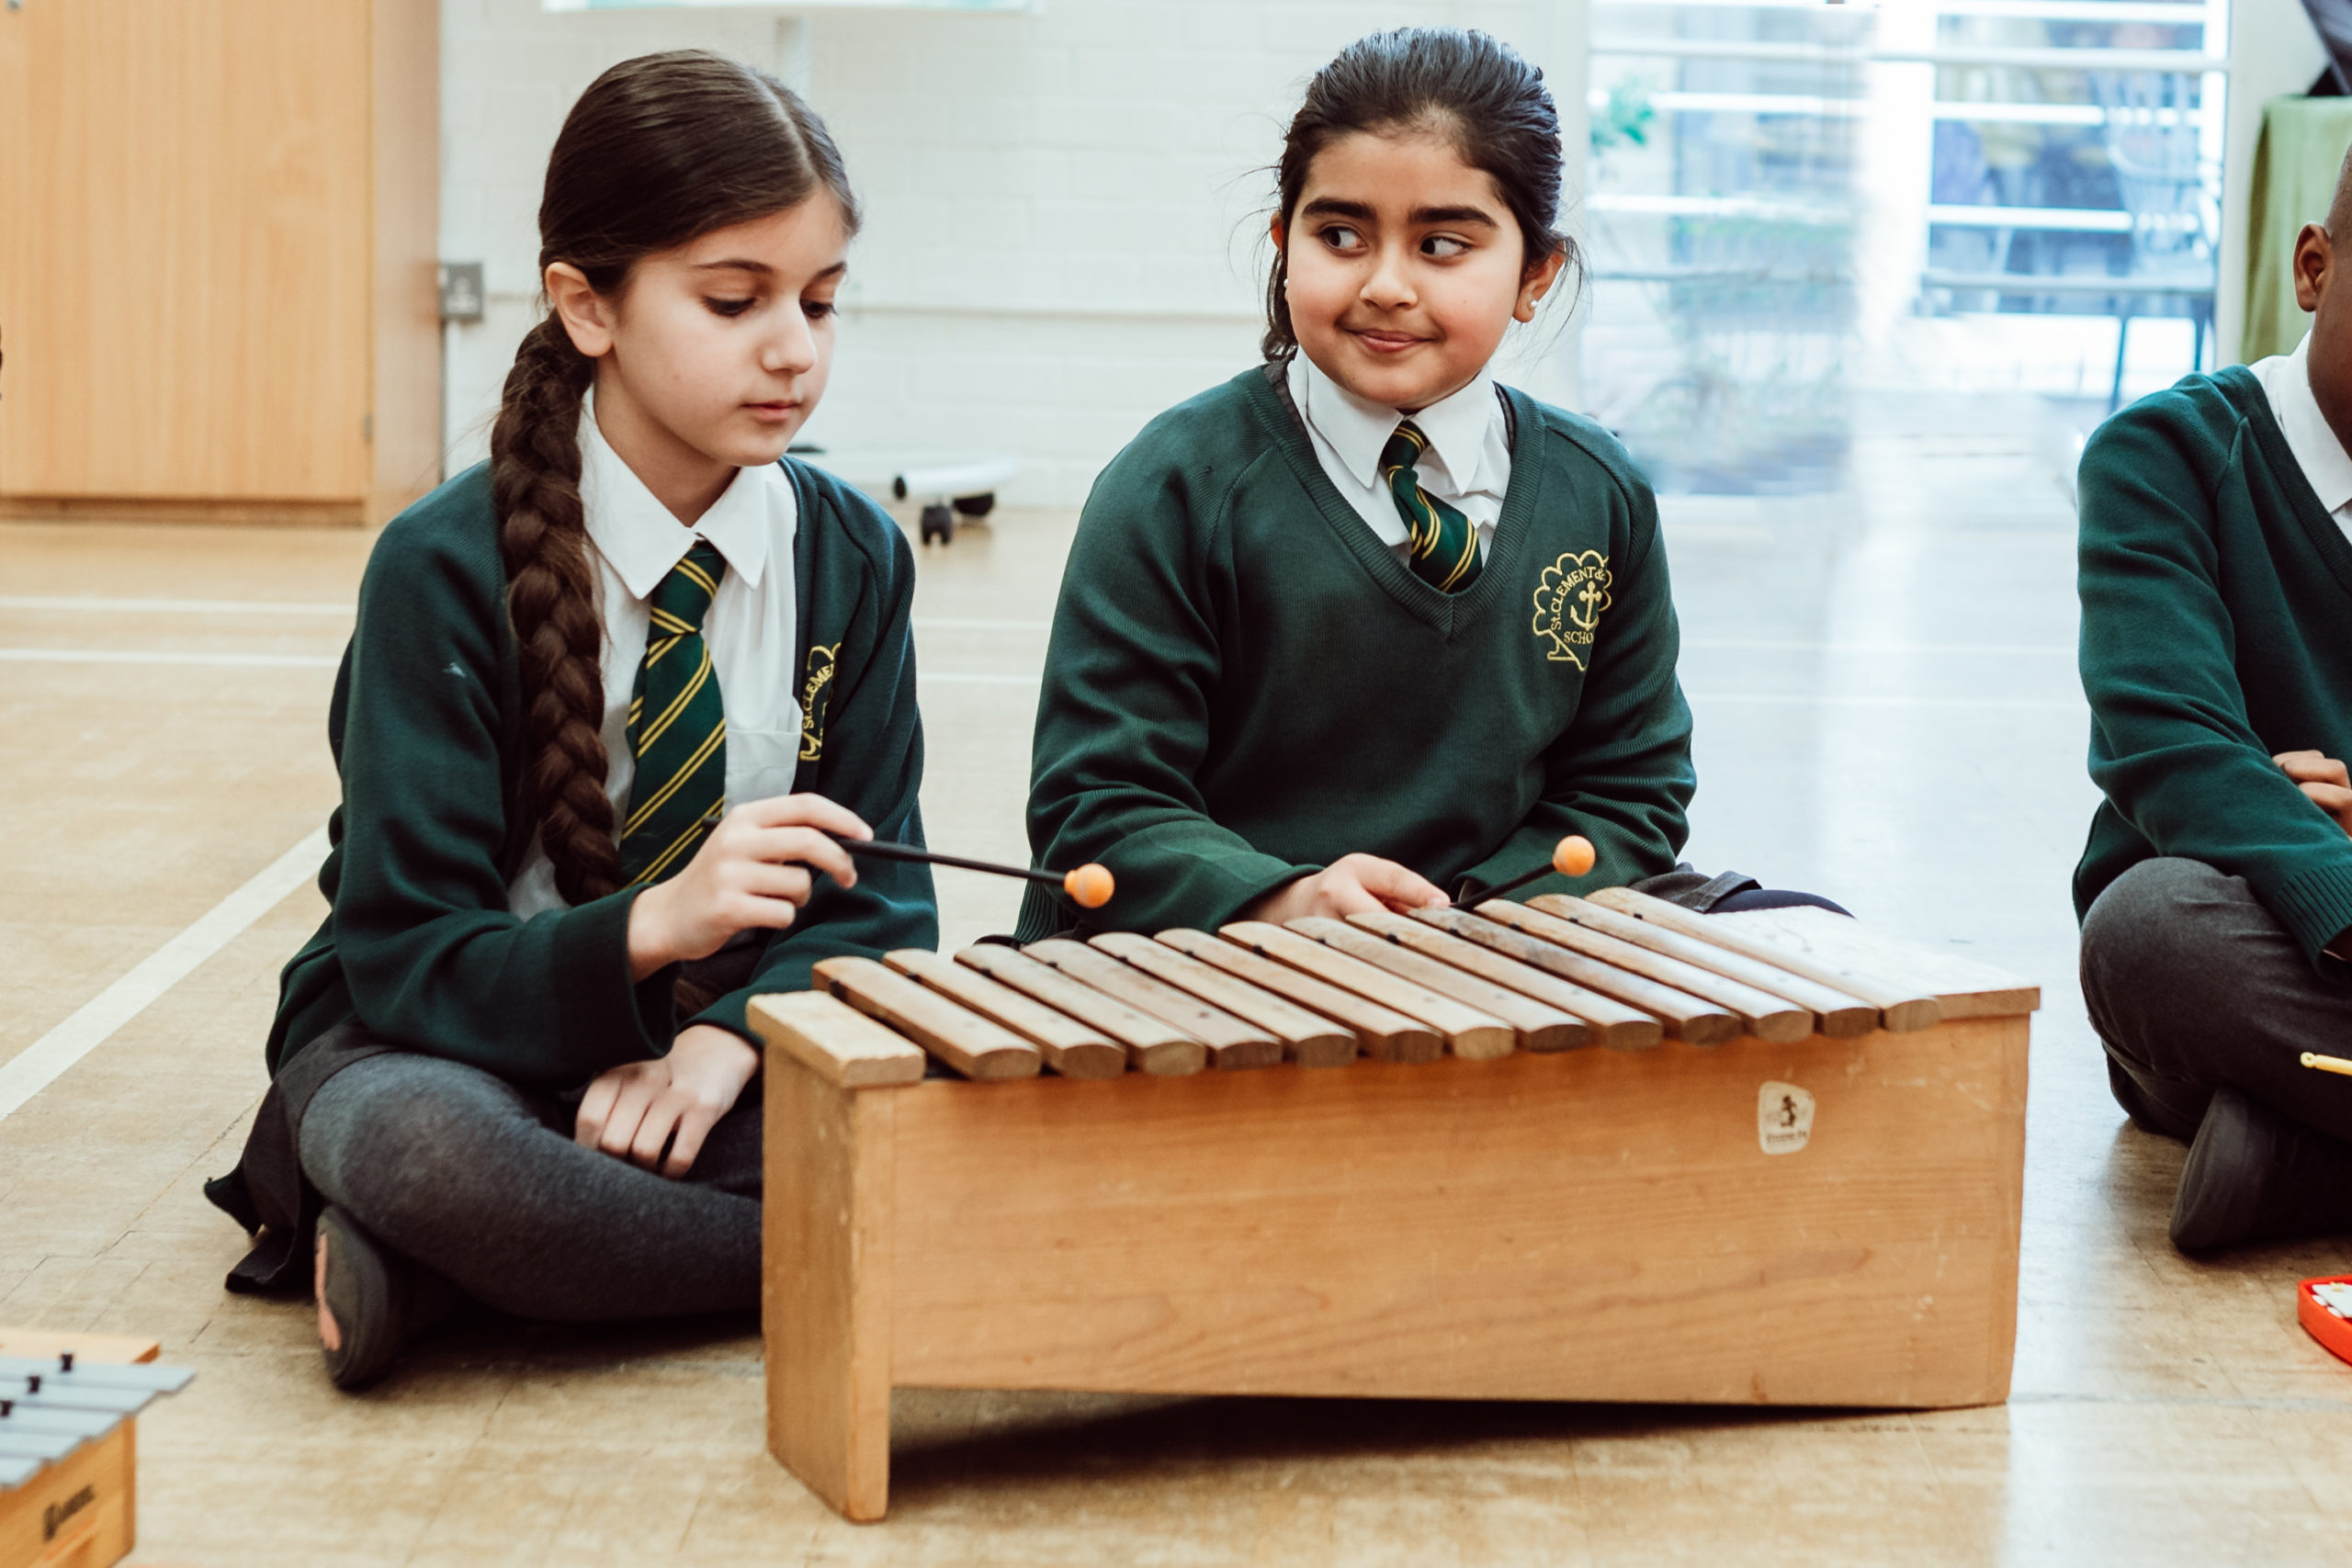 Two schoolchildren in green uniforms are seated on the floor, sharing a wooden xylophone. The girl on the left, with a long braid, holds a mallet and appears focused on the instrument, while the girl on the right looks at her with a smile, suggesting a moment of musical collaboration and learning.